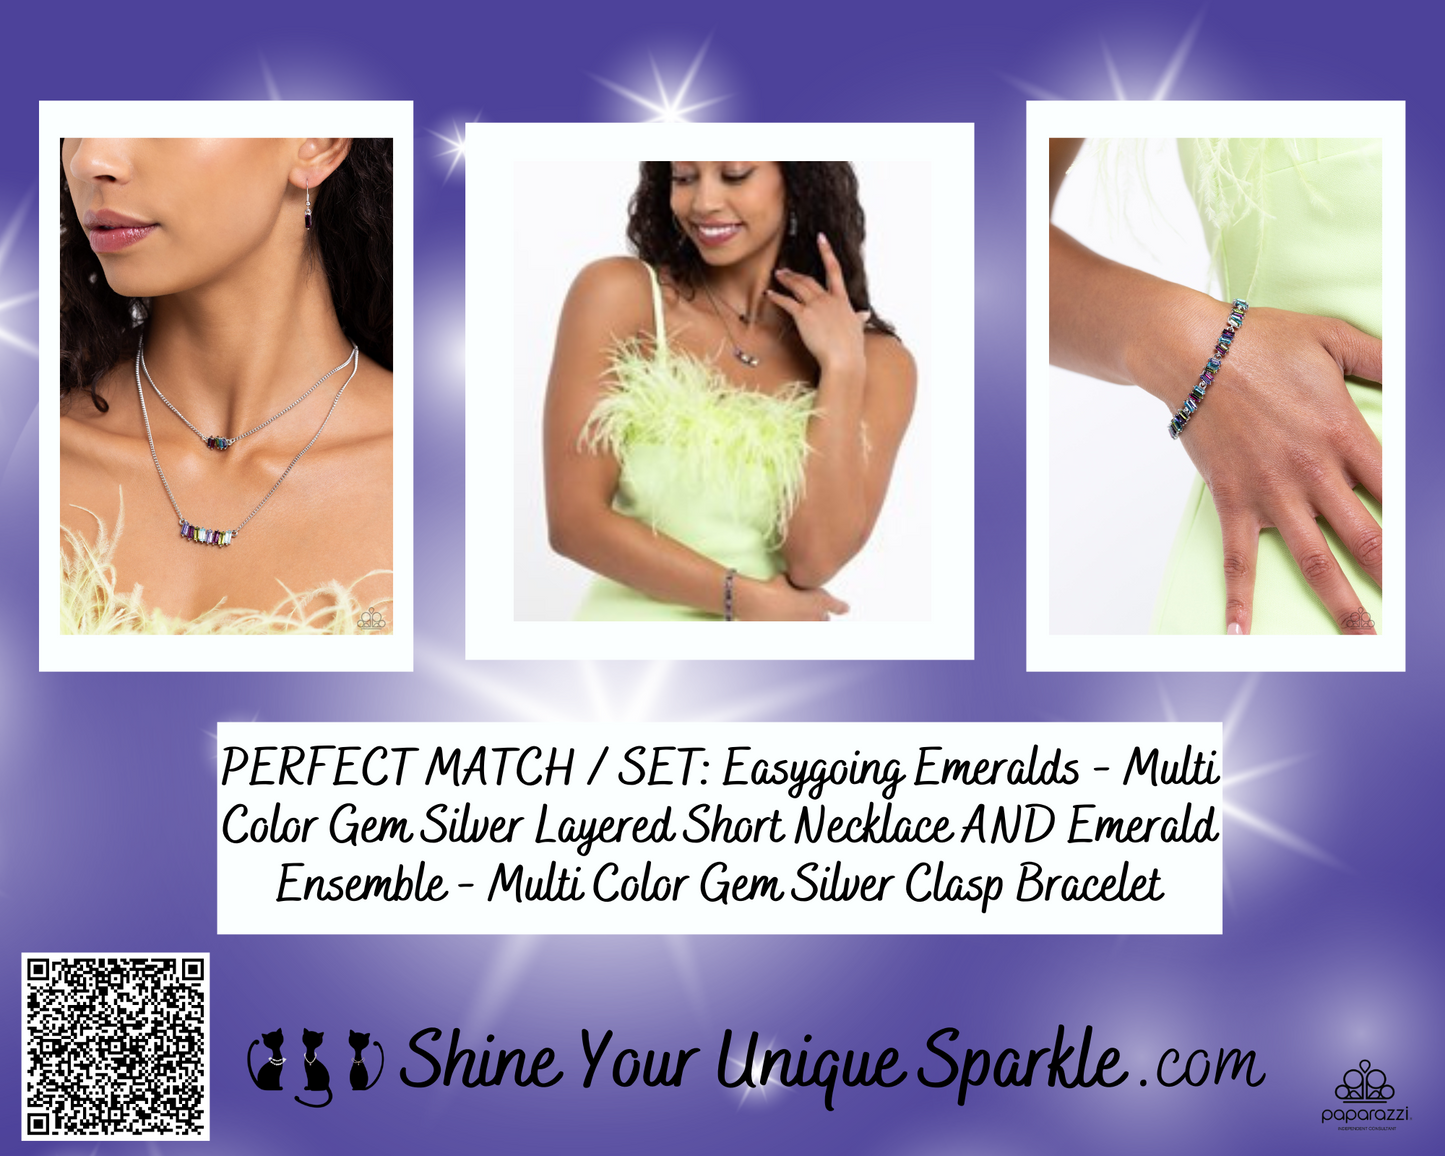 PERFECT MATCH / SET: Easygoing Emeralds - Multi Color Gem Silver Layered Short Necklace AND Emerald Ensemble - Multi Color Gem Silver Clasp Bracelet